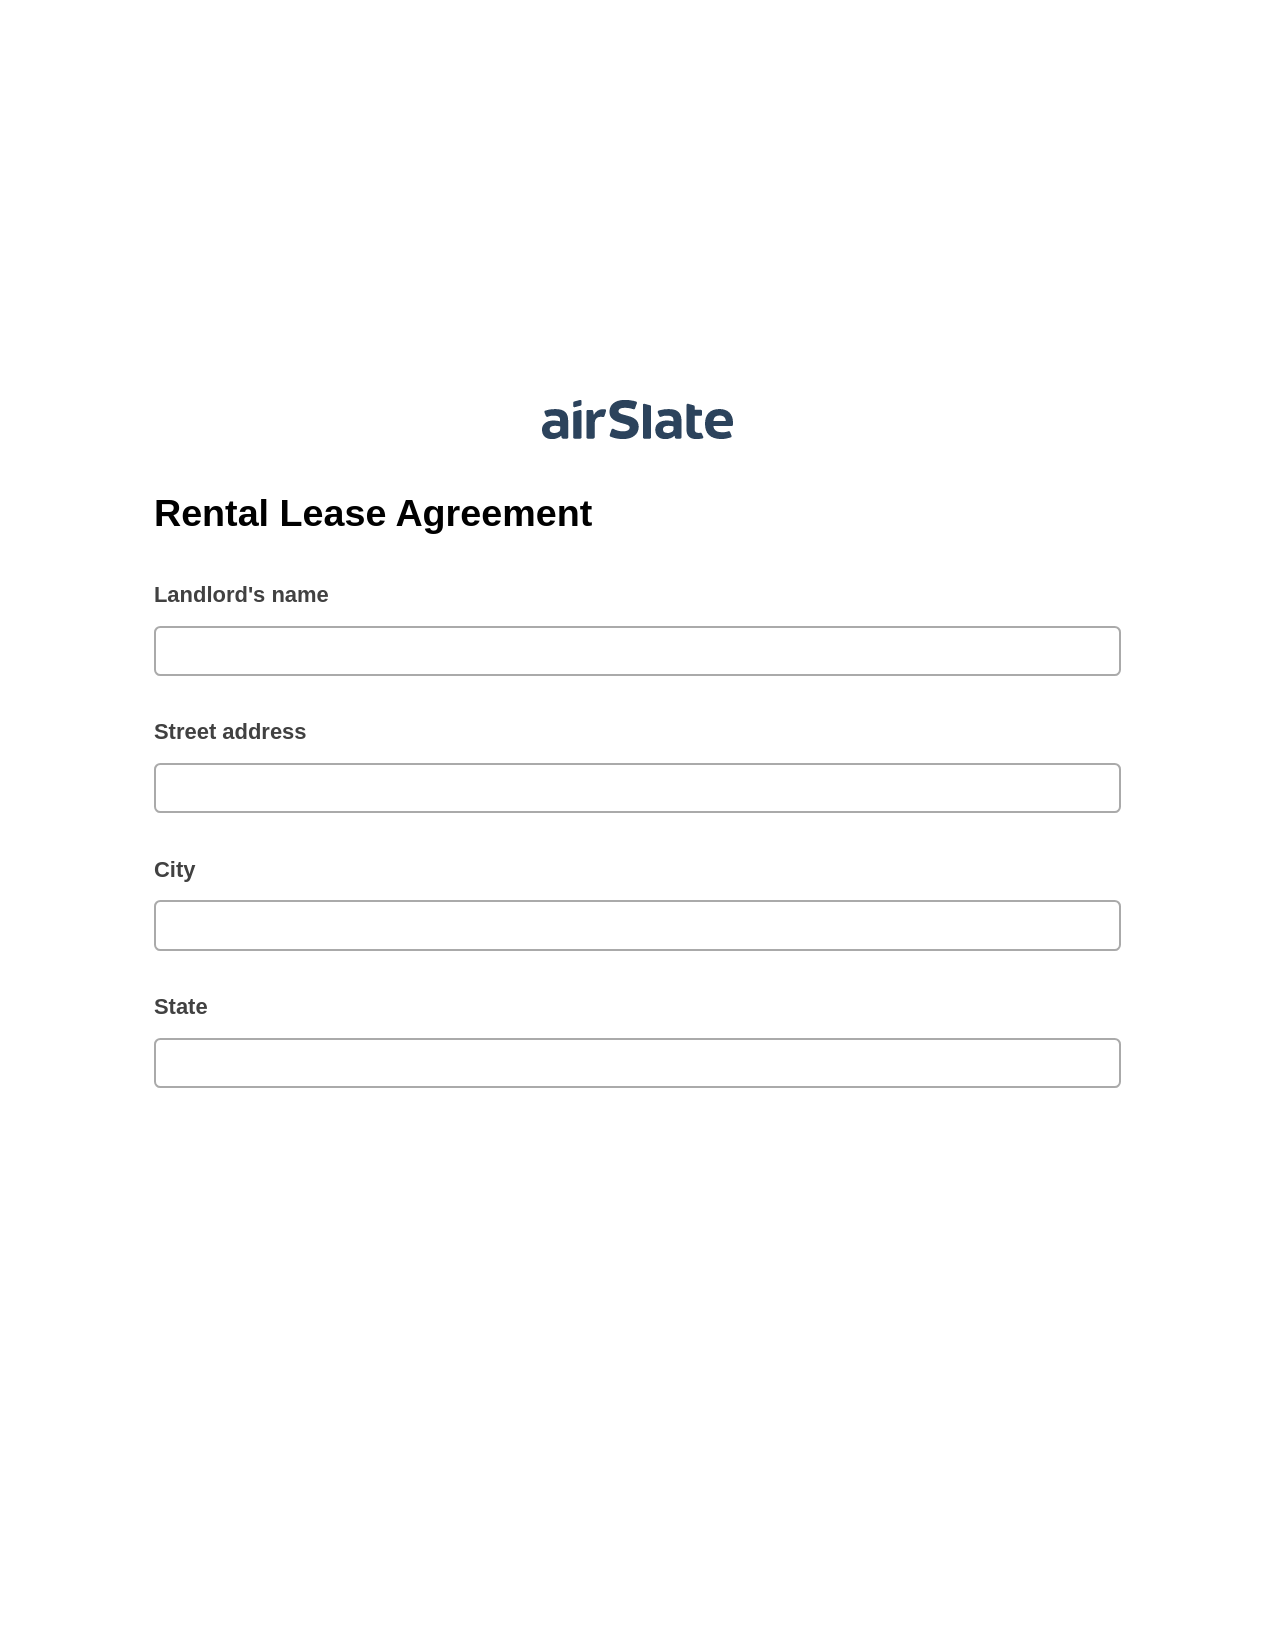 Rental Lease Agreement Pre-fill from Salesforce Records with SOQL Bot, Invoke Salesforce Process Bot, Archive to SharePoint Folder Bot